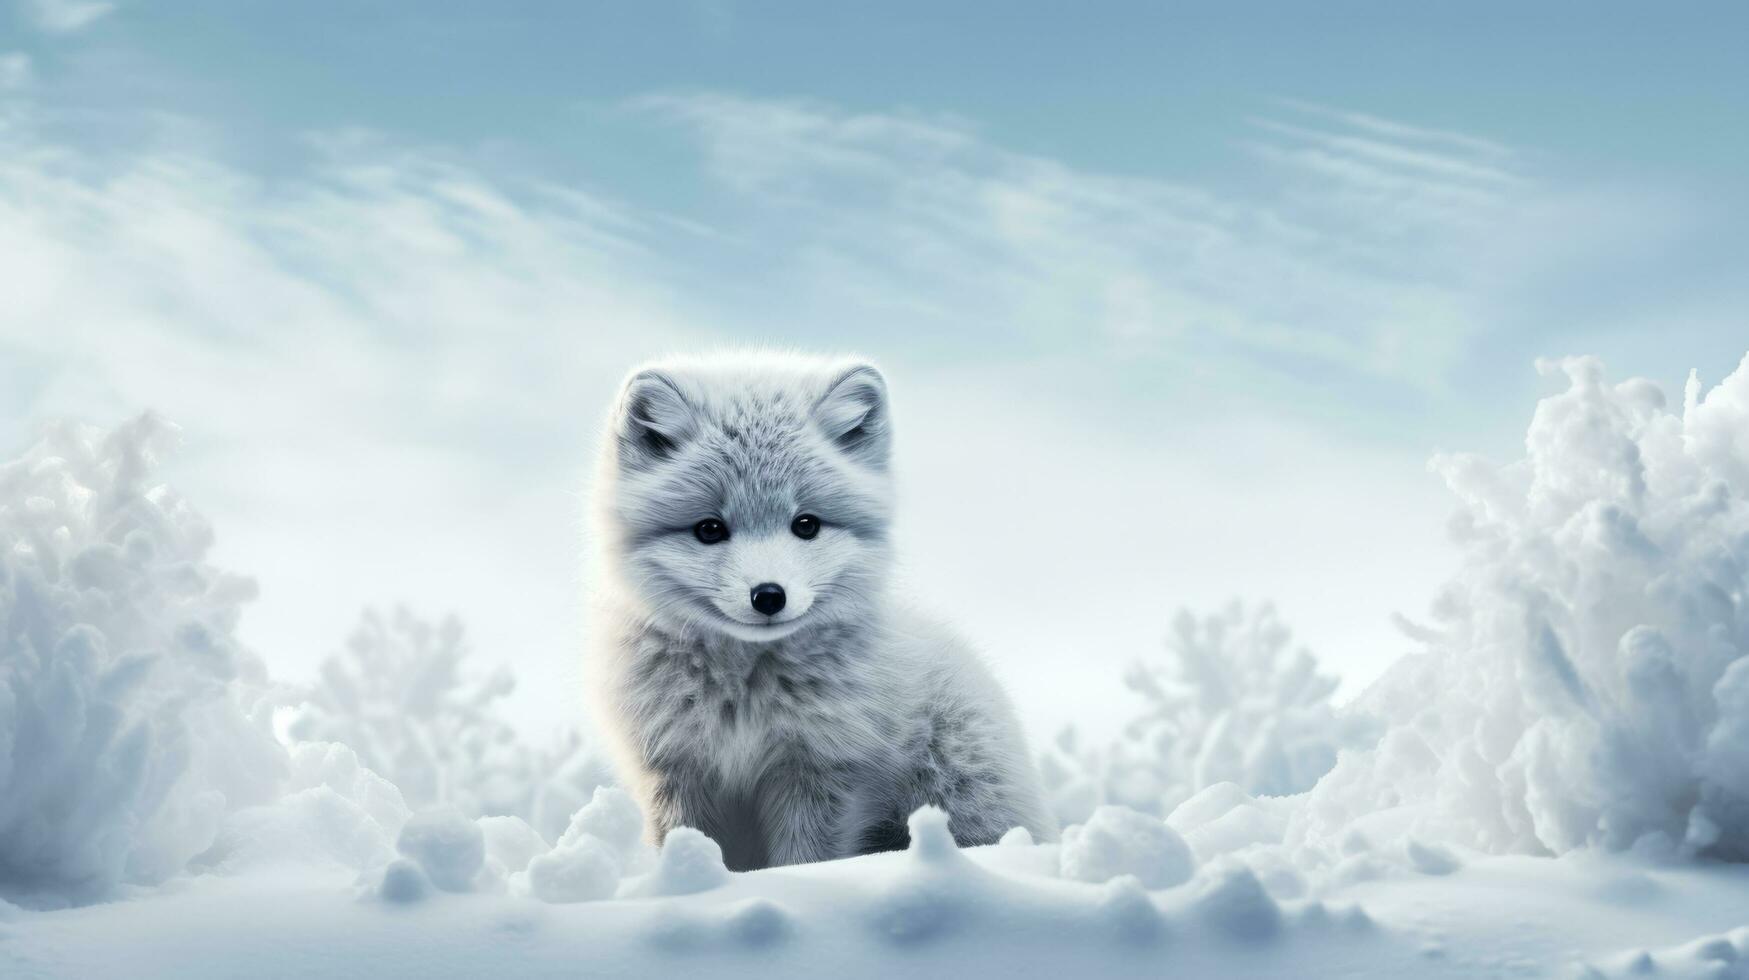 Arctic fox on snow background with empty space for text photo